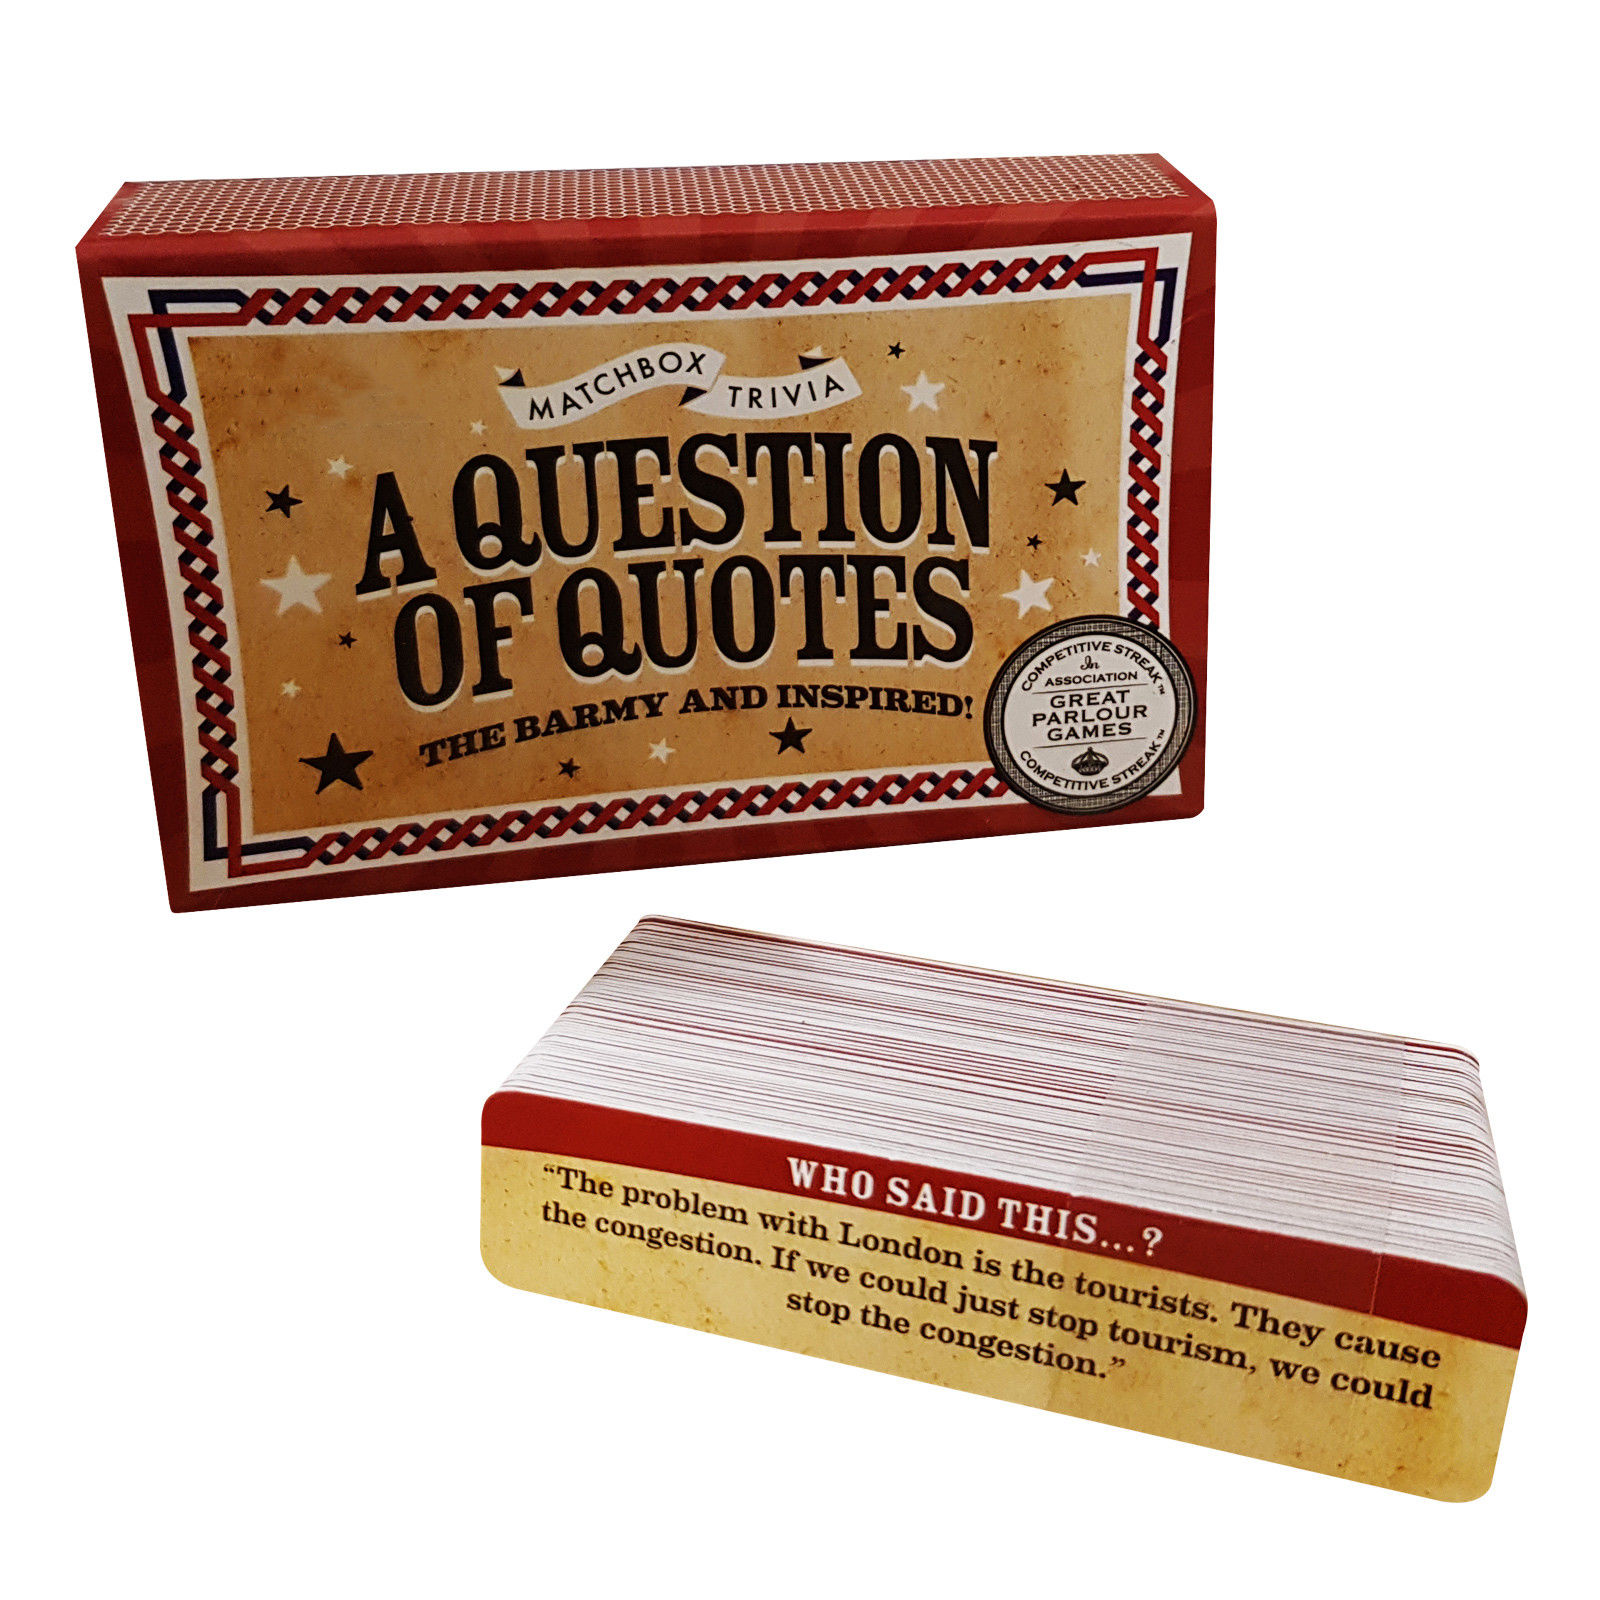 A QUESTION OF QUOTES Trivia Quiz Cards Game Family Travel Party Games Christmas 5052089144088 | eBay